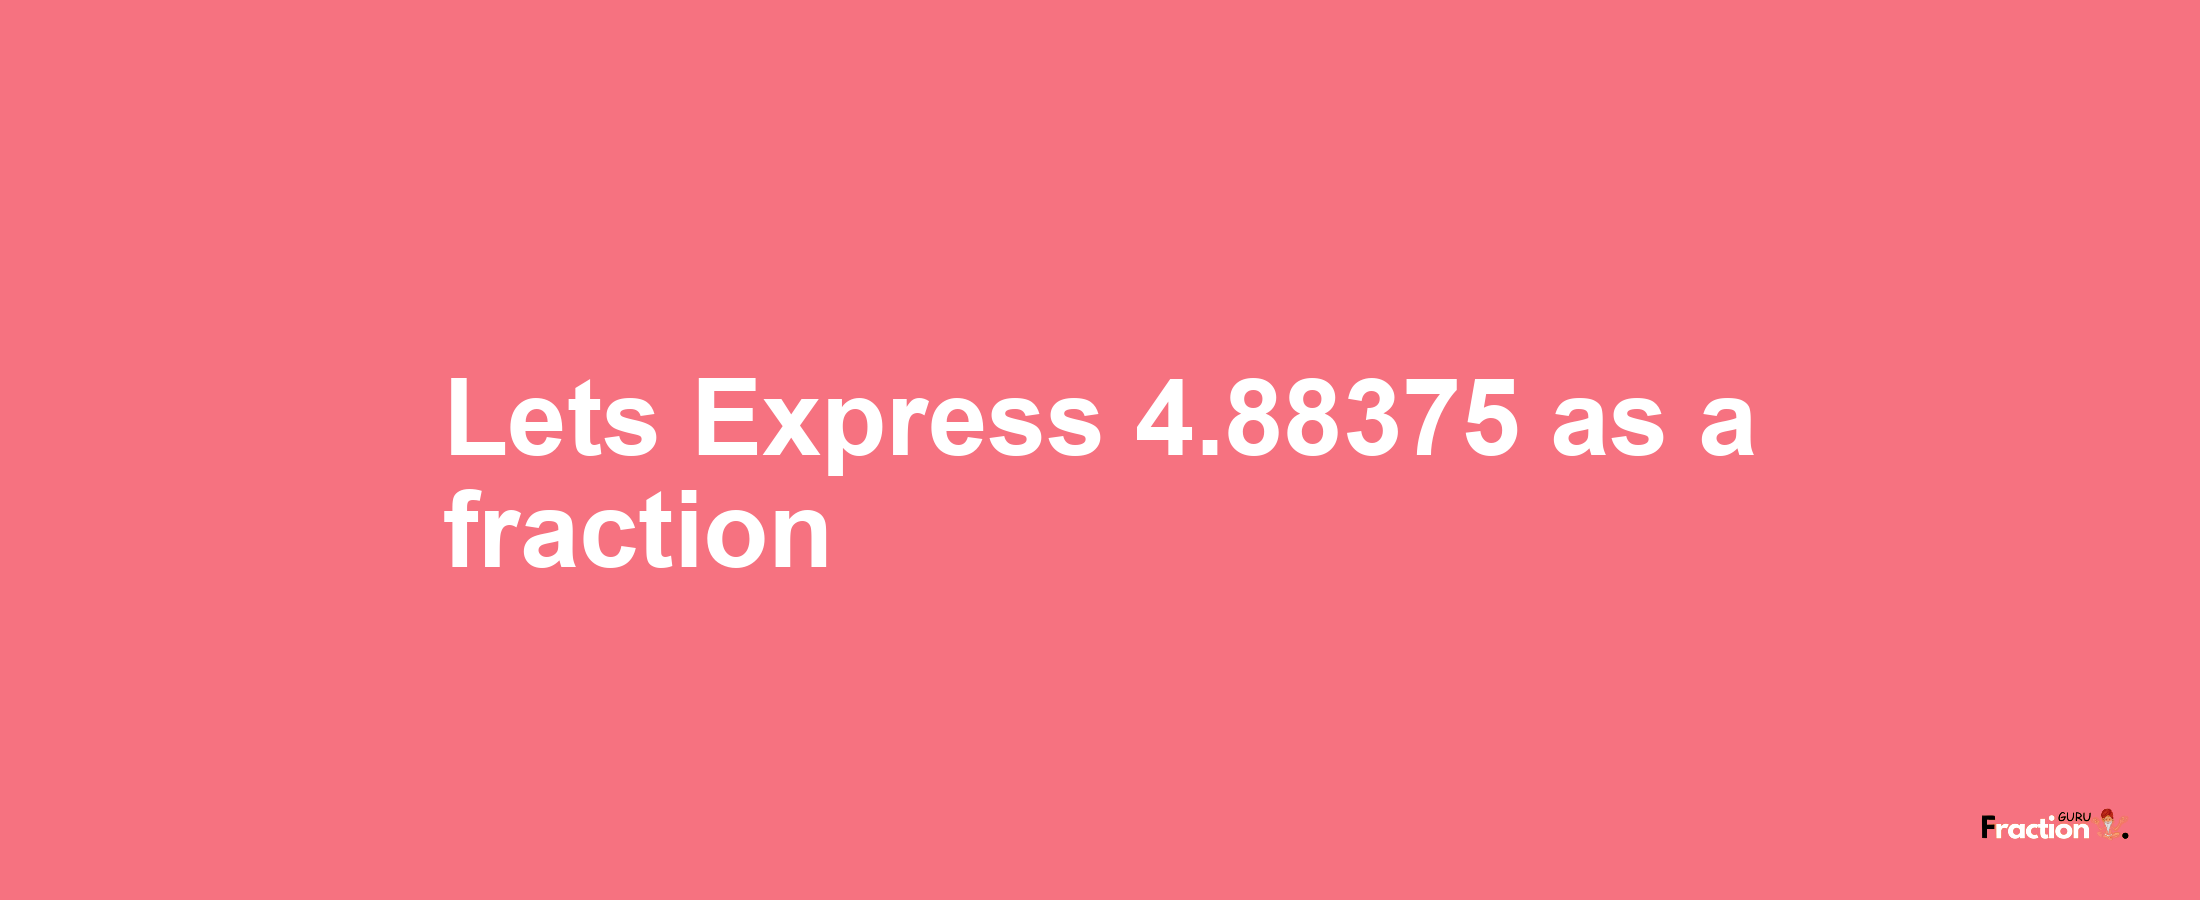 Lets Express 4.88375 as afraction